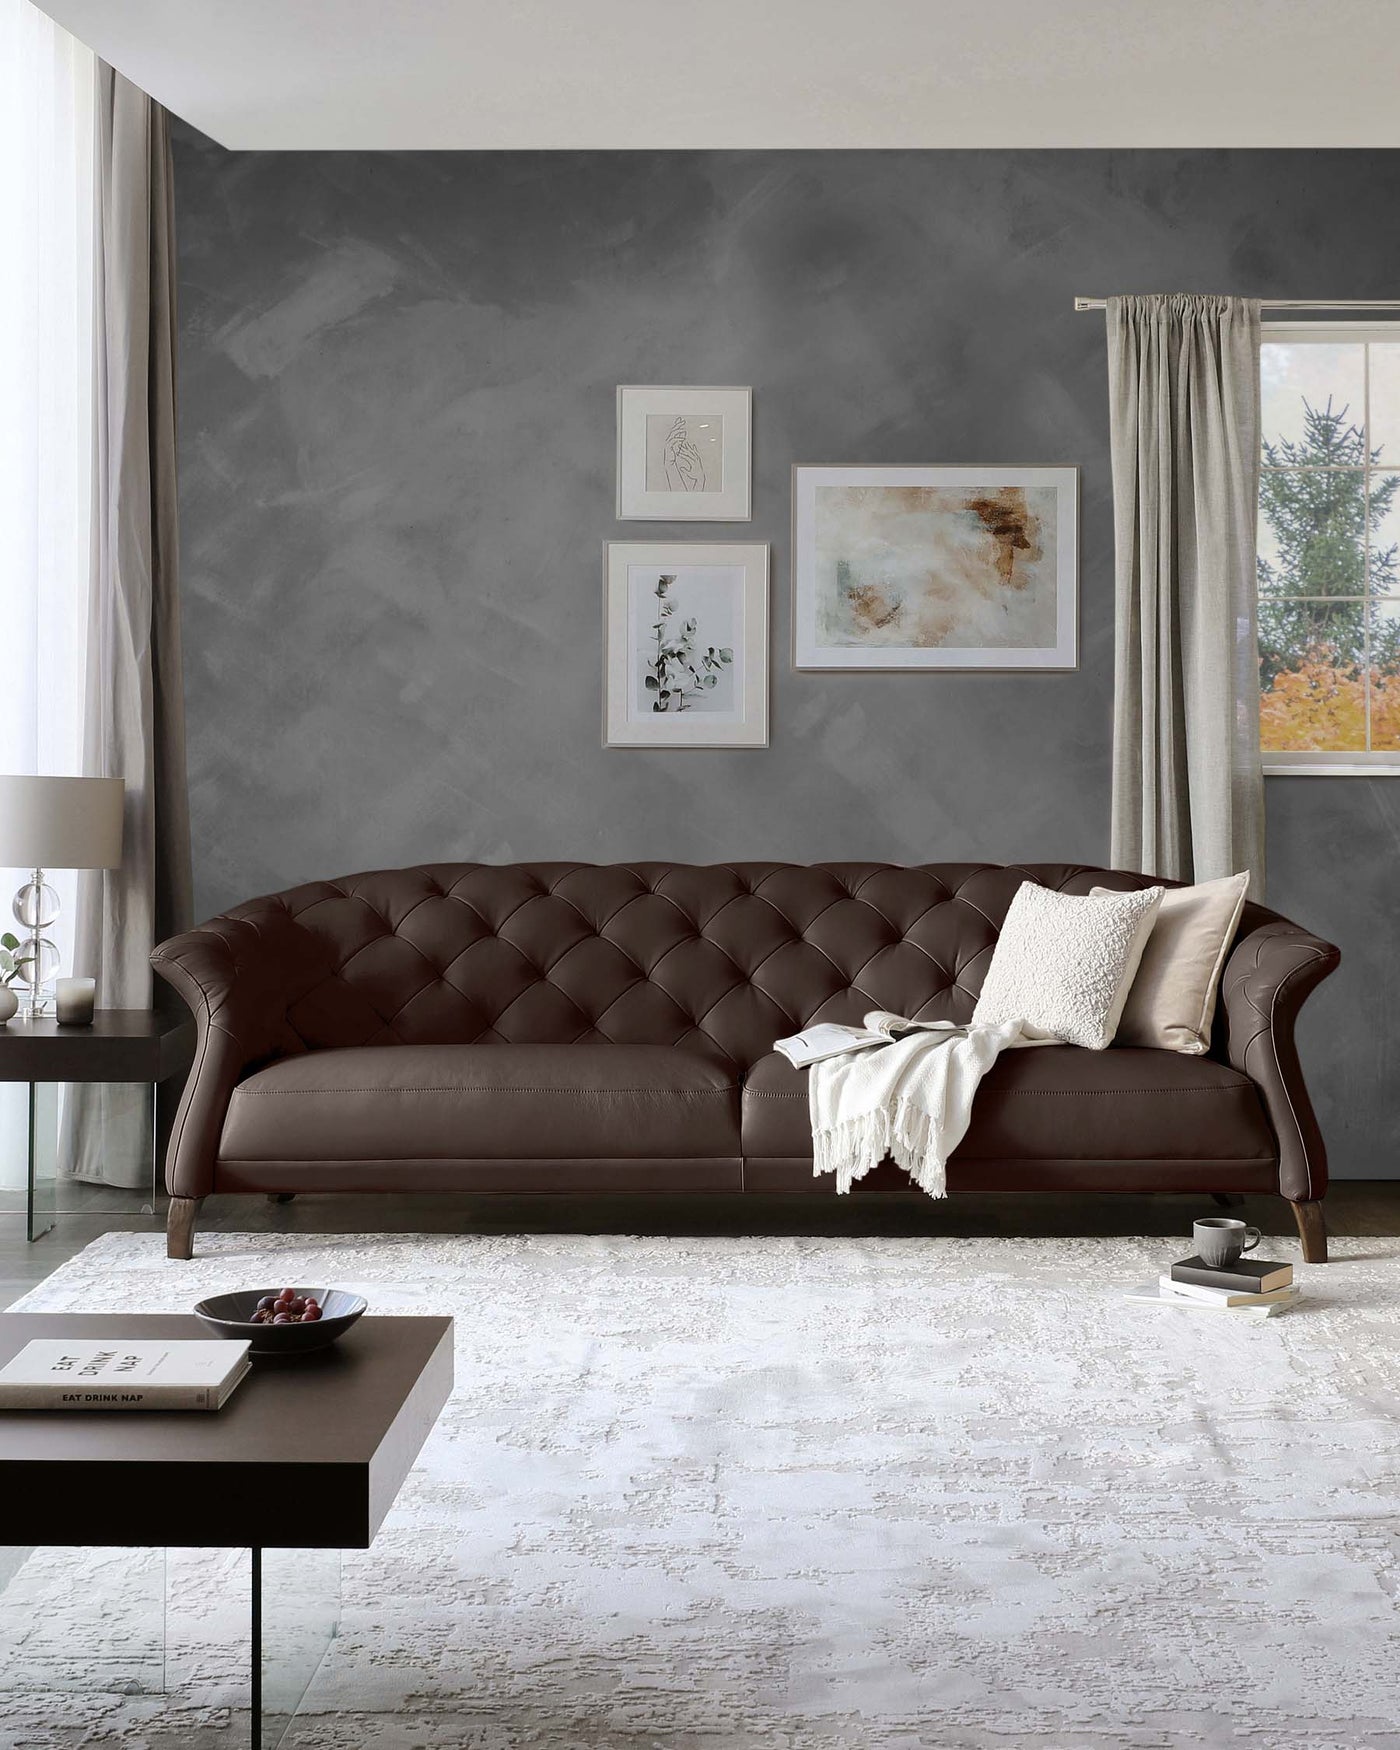 Elegant living room featuring a classic chesterfield sofa in dark brown leather with tufted back and arms, decorative cushions, and a cosy off-white throw. A sleek, modern side table with a dark finish and a simple, understated coffee table complement the sofa.